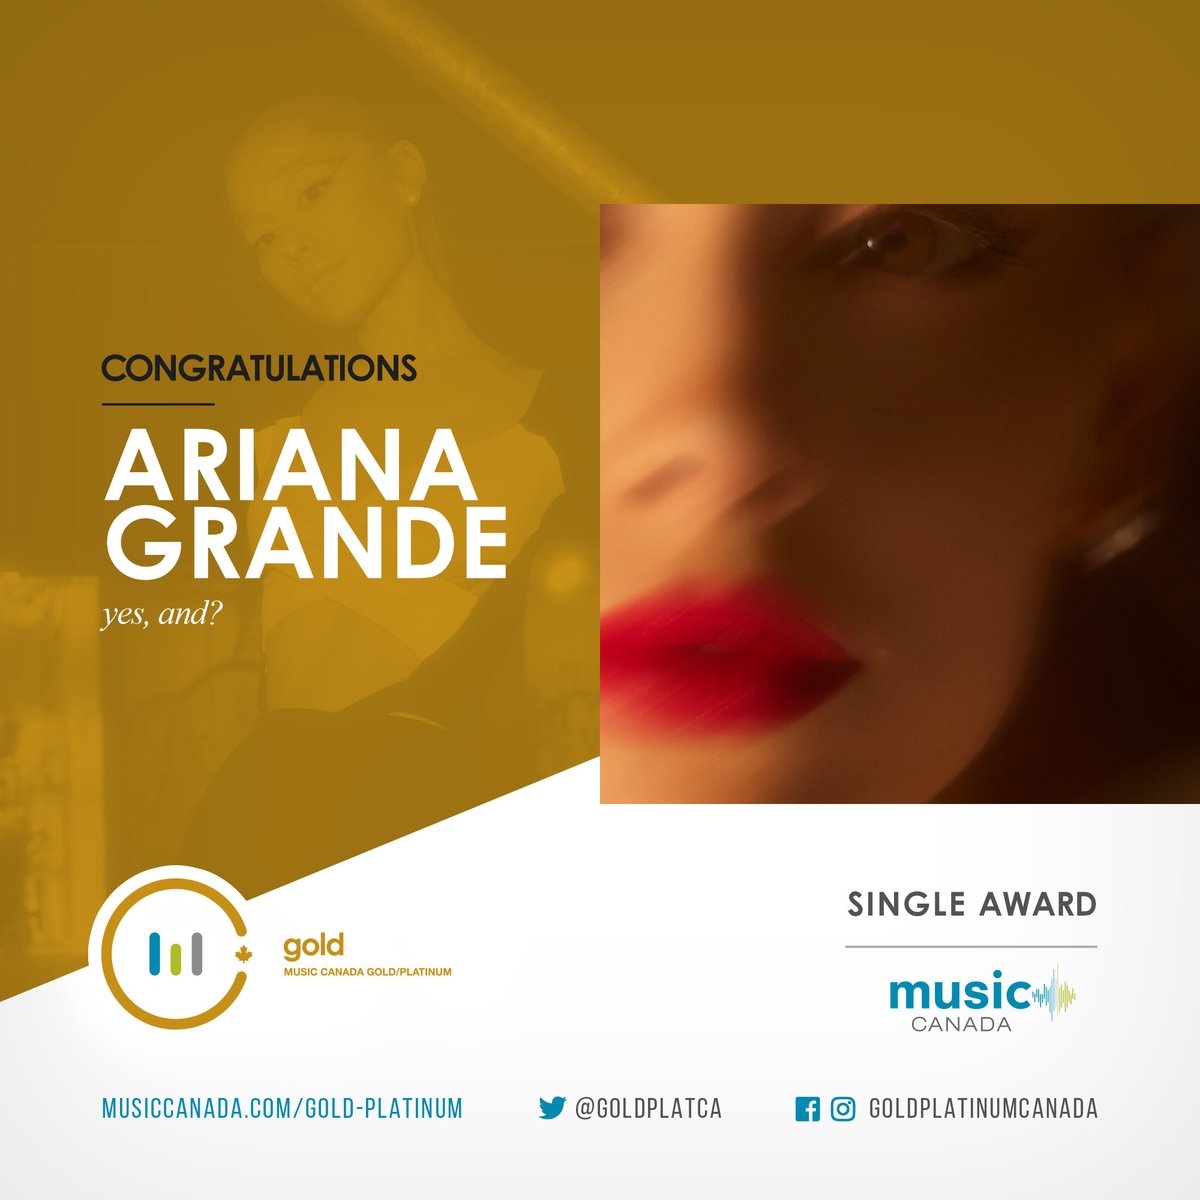 'yes, and?', the recent hit track from Ariana Grande is now officially certified Gold Single📀🍁 @umusic #GoldinCanada